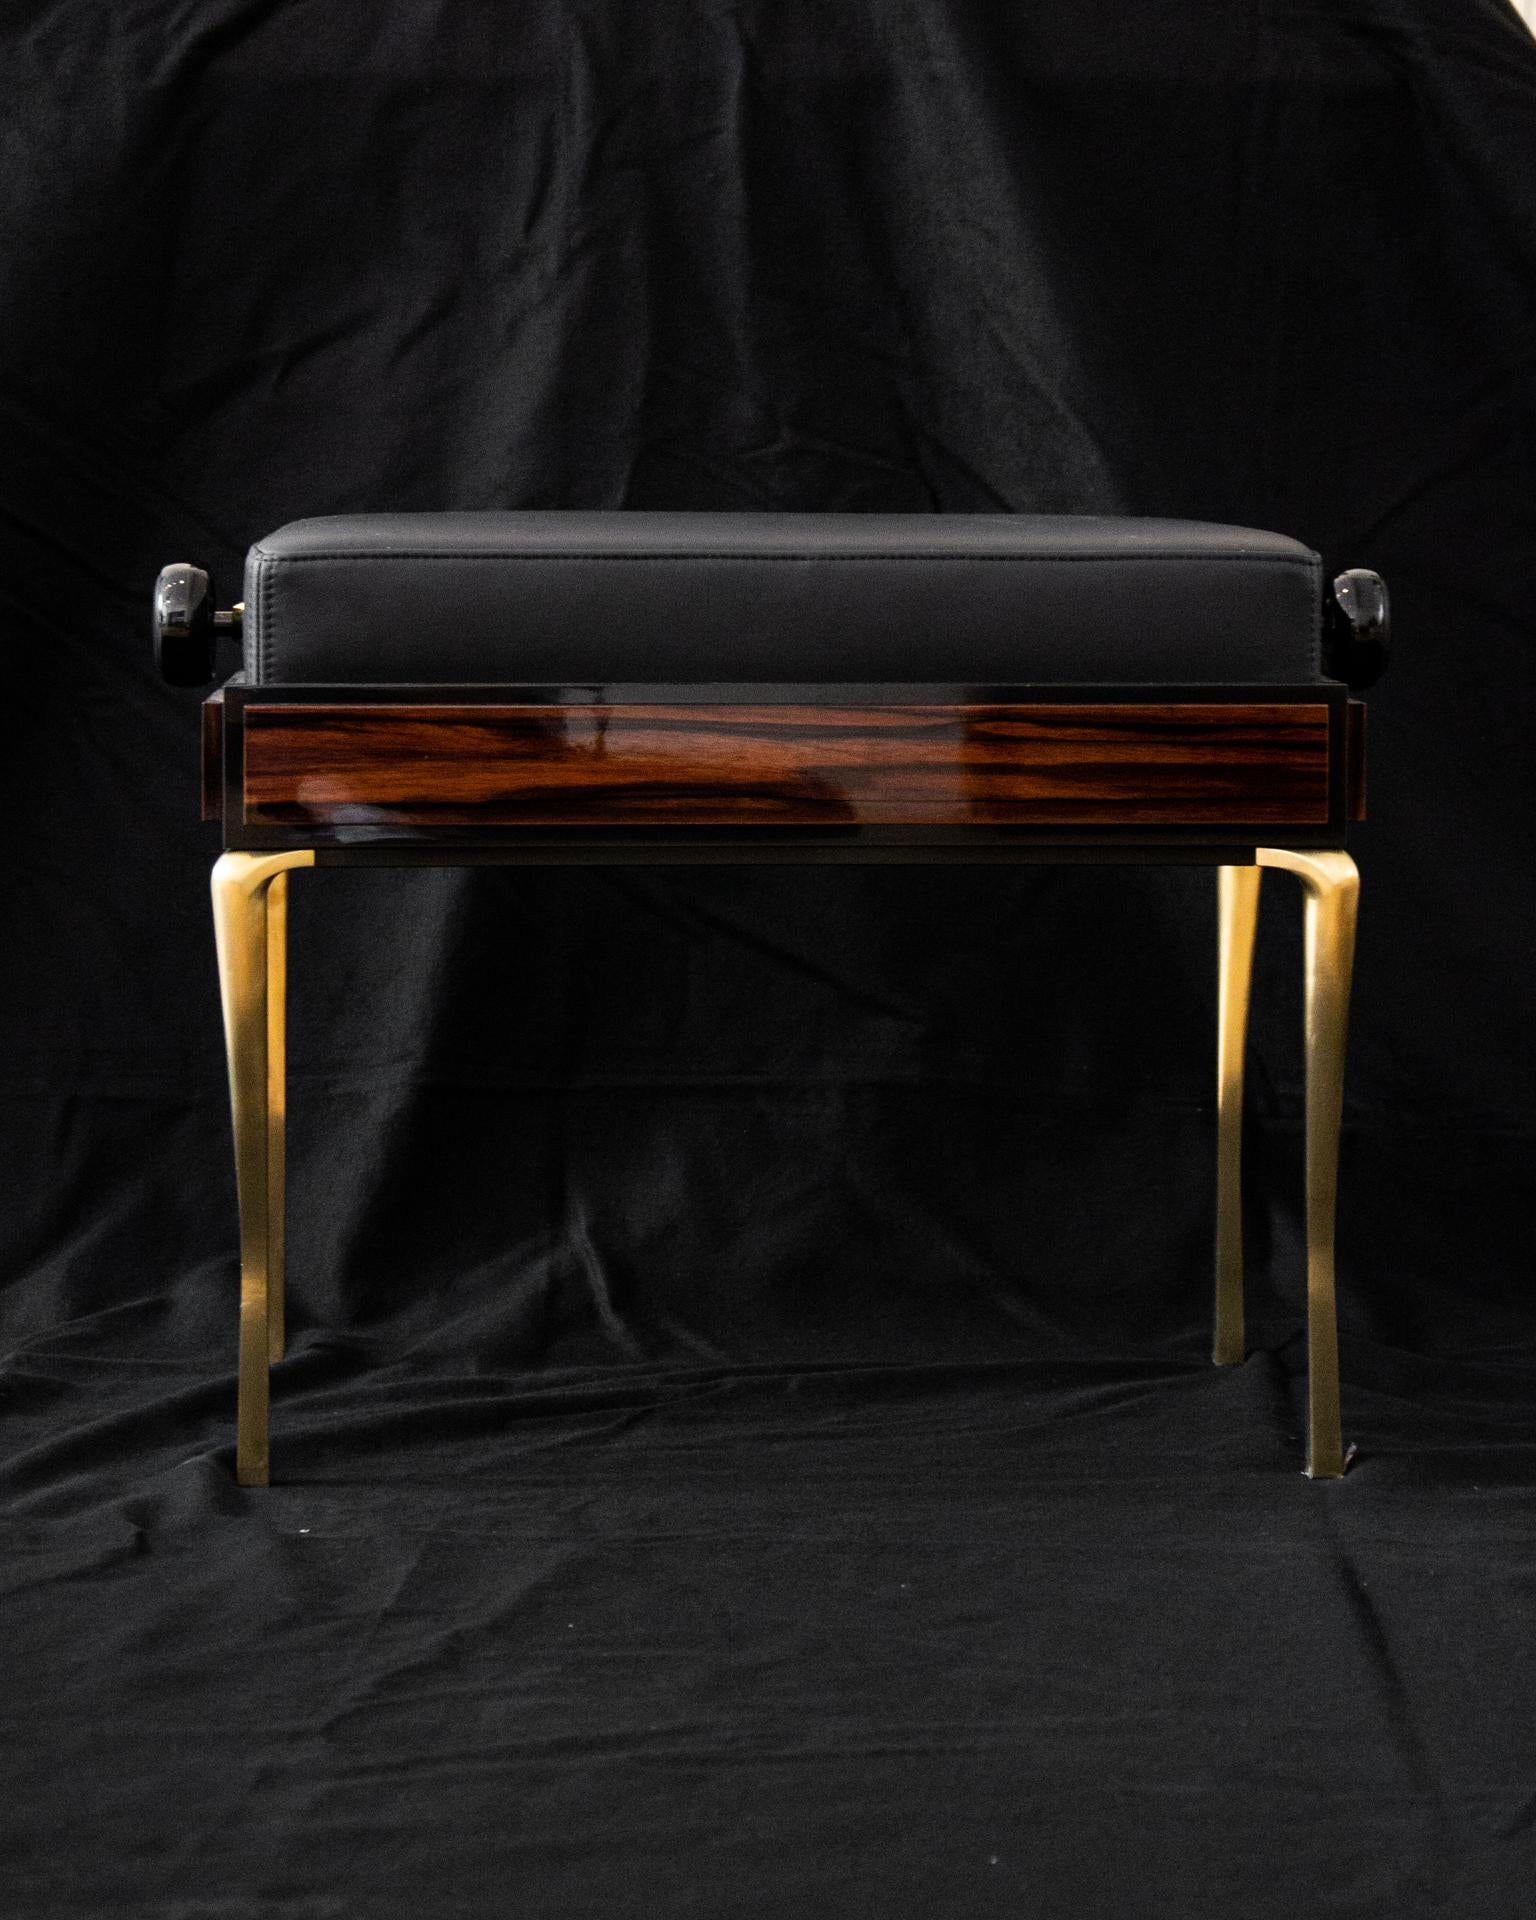 Introducing the world’s first Beautiful Piano Bench. Faced with the challenge of crafting an aesthetically stunning seat to complement the genuinely designed pianos by Poul Henningsen, we set out to create a piece that:

-has a striking and